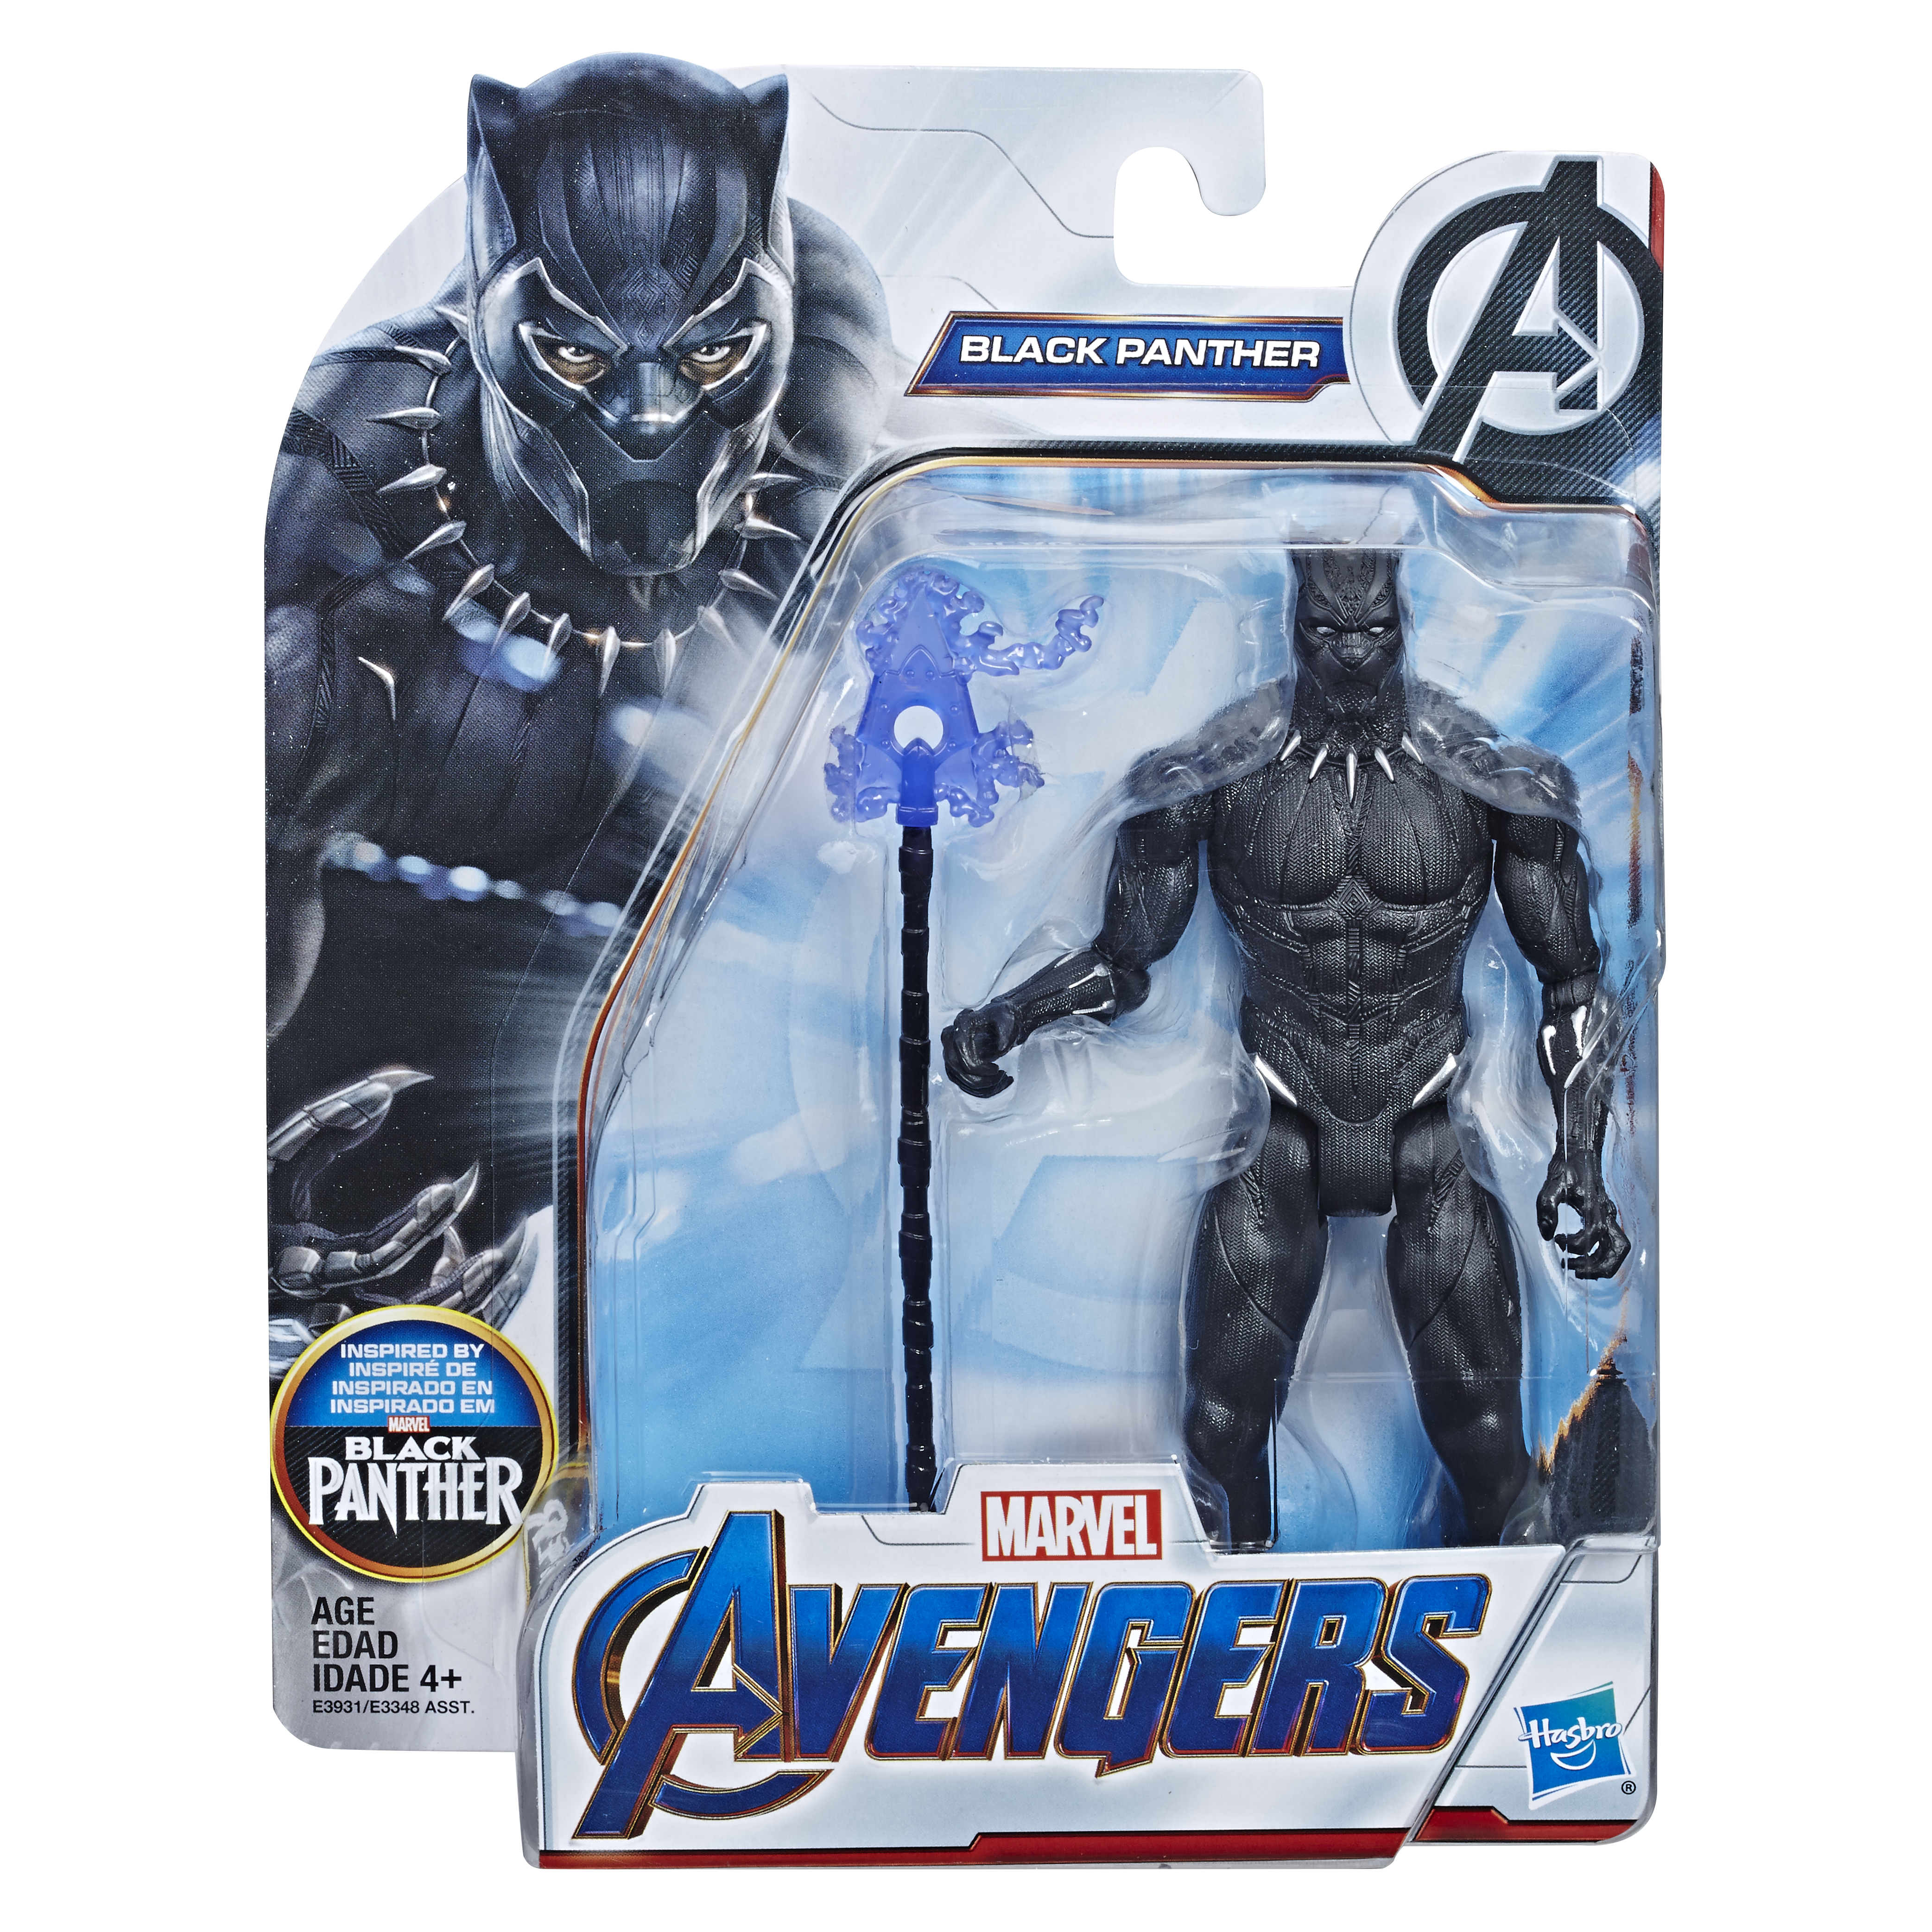 6-inch Black Panther carded